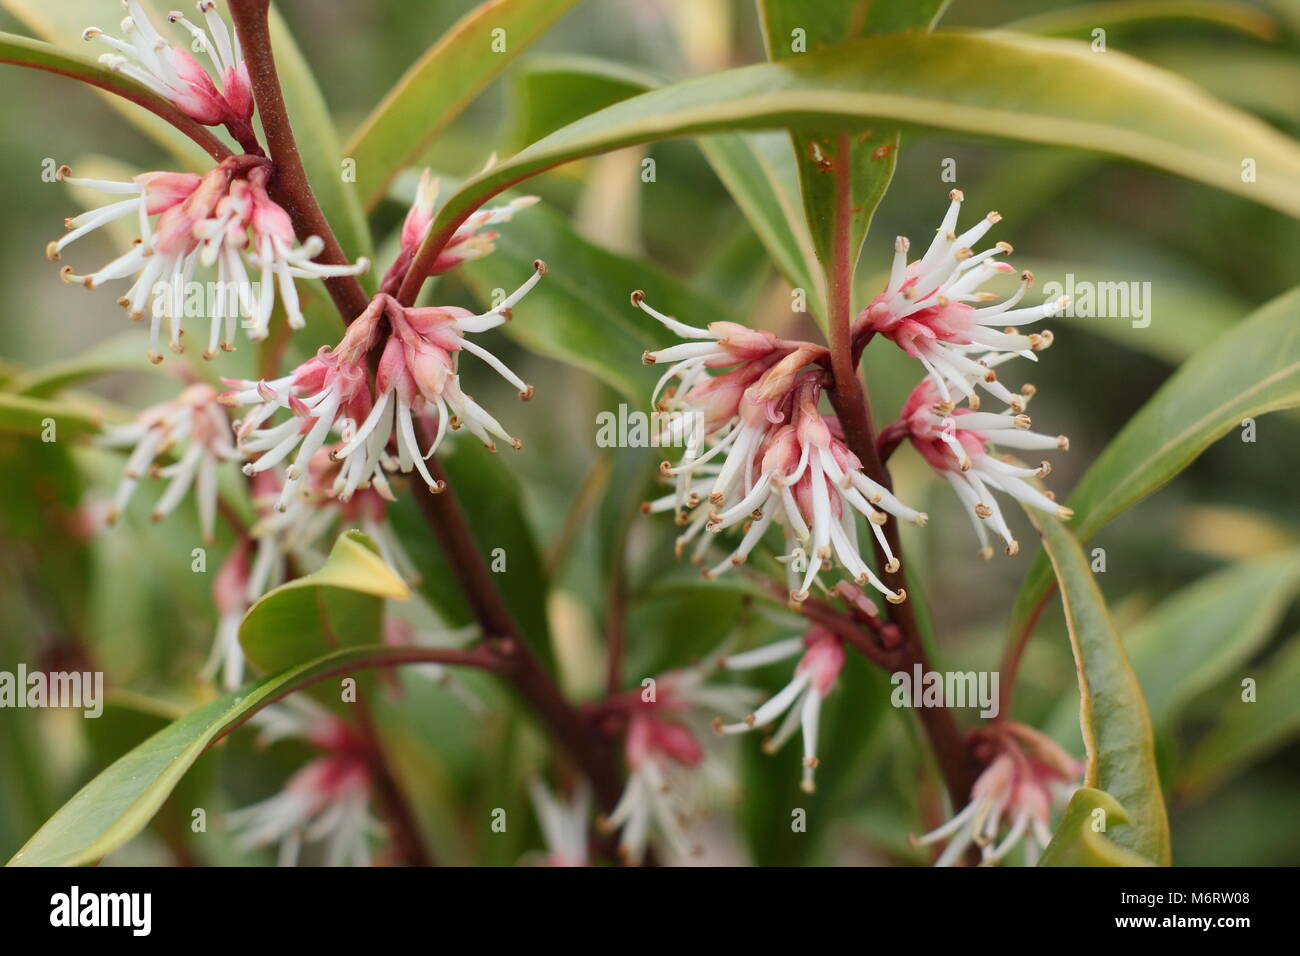 Fragrant flowers of winter flowering Sarcococca hookeriana var. digyna (Christmas or Sweet box), UK Stock Photo